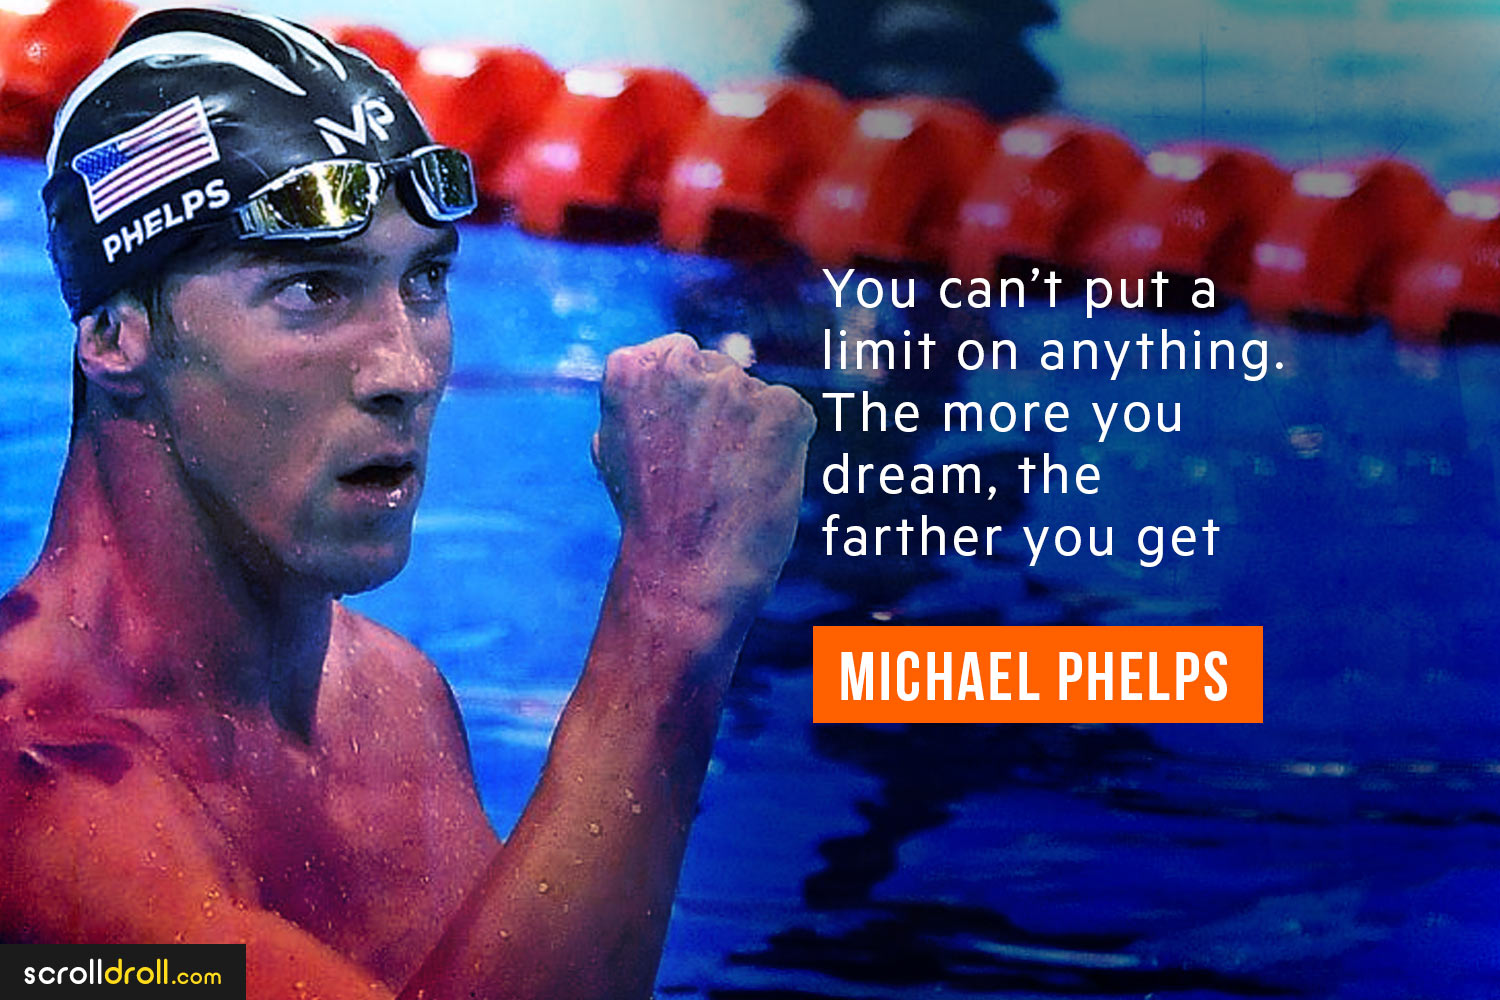 16 Motivational Quotes By Sporting Legends That'll Inspire You